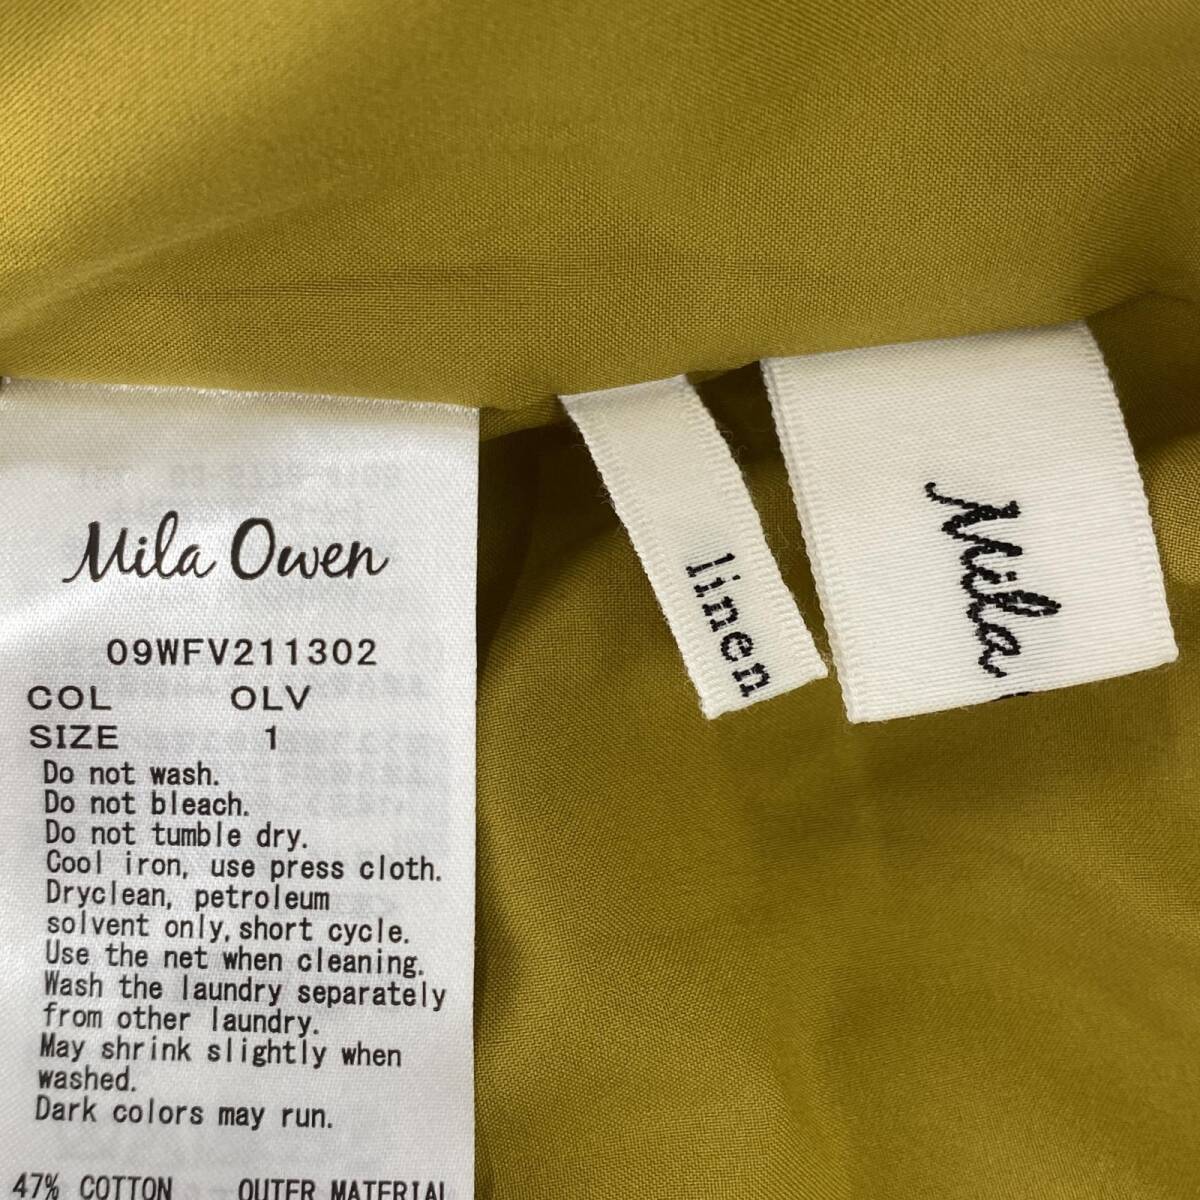 Mila Owen Mira o-wen no color after tuck the best size1/ red yellow lady's 